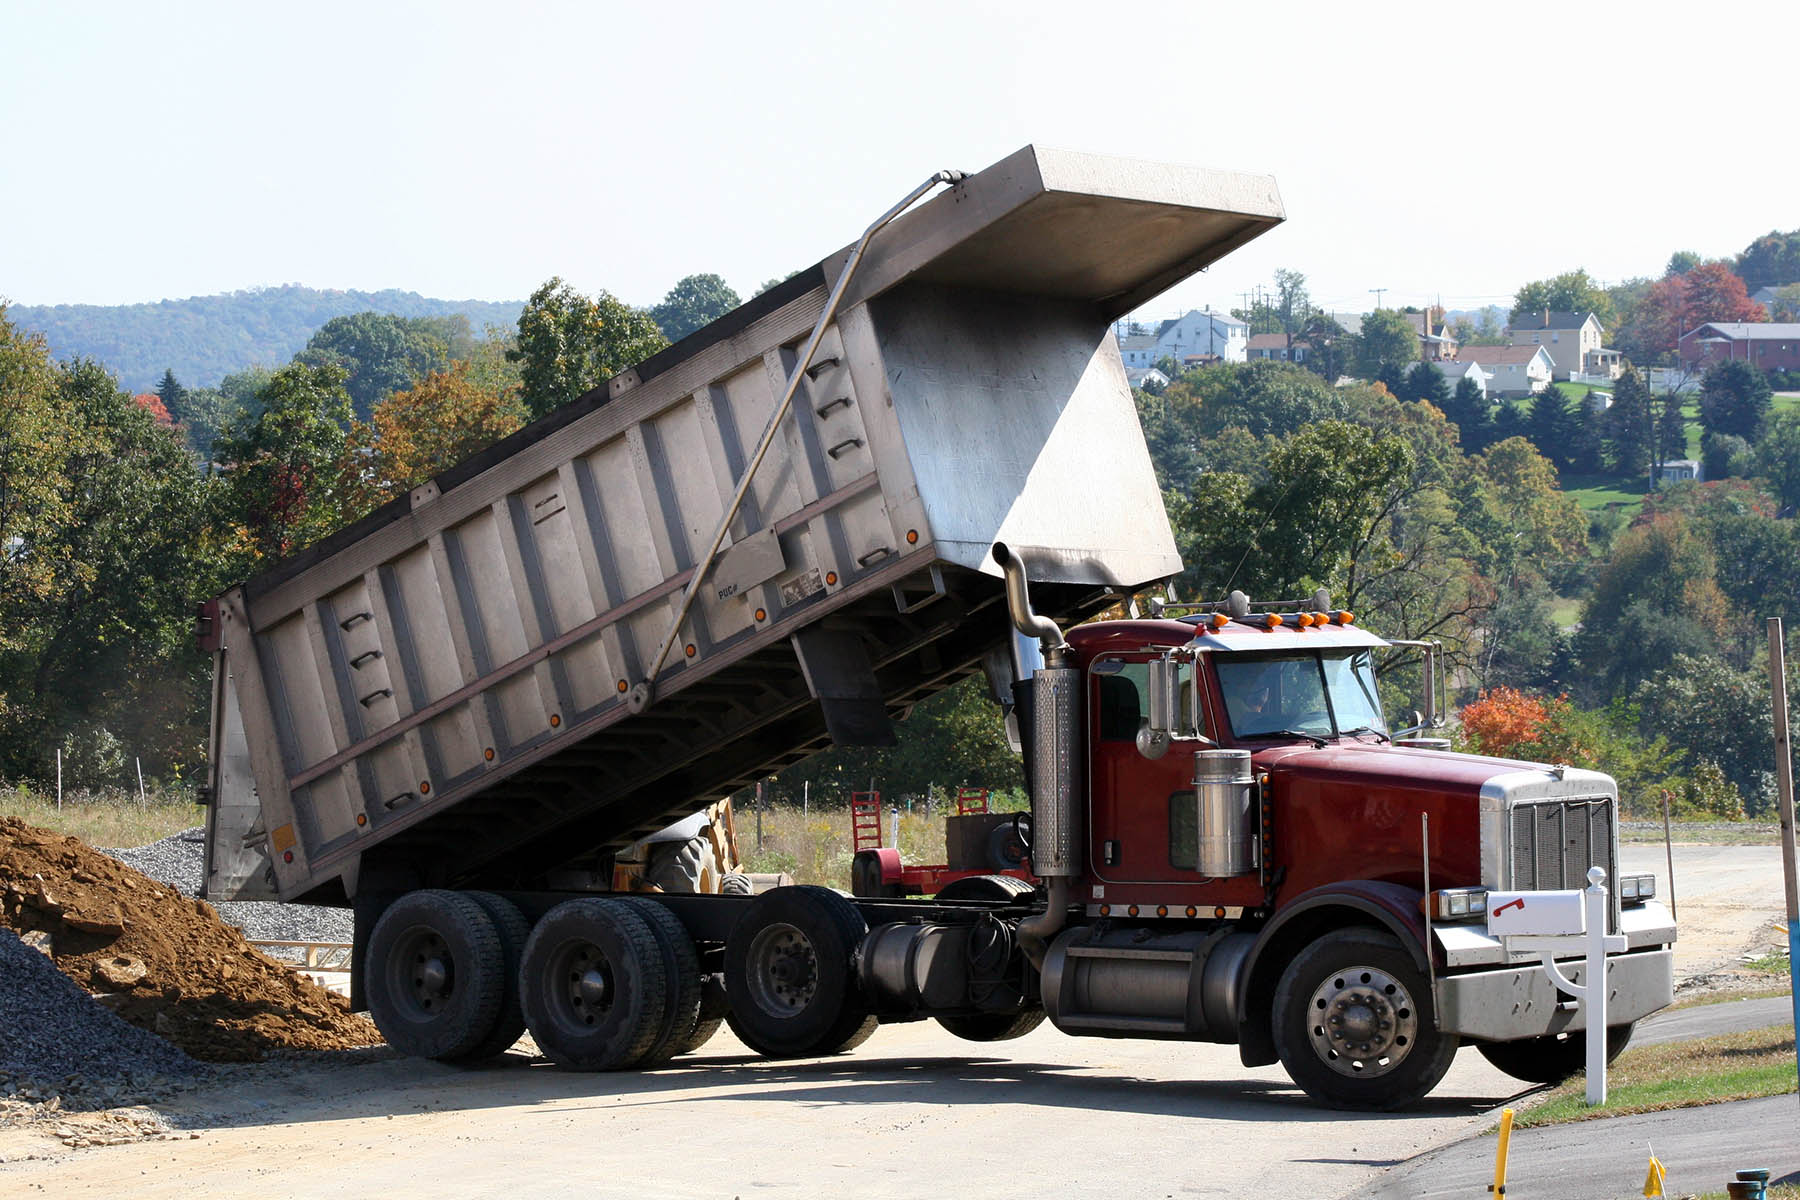 The Essential Guide to Obtaining a Dump Truck License